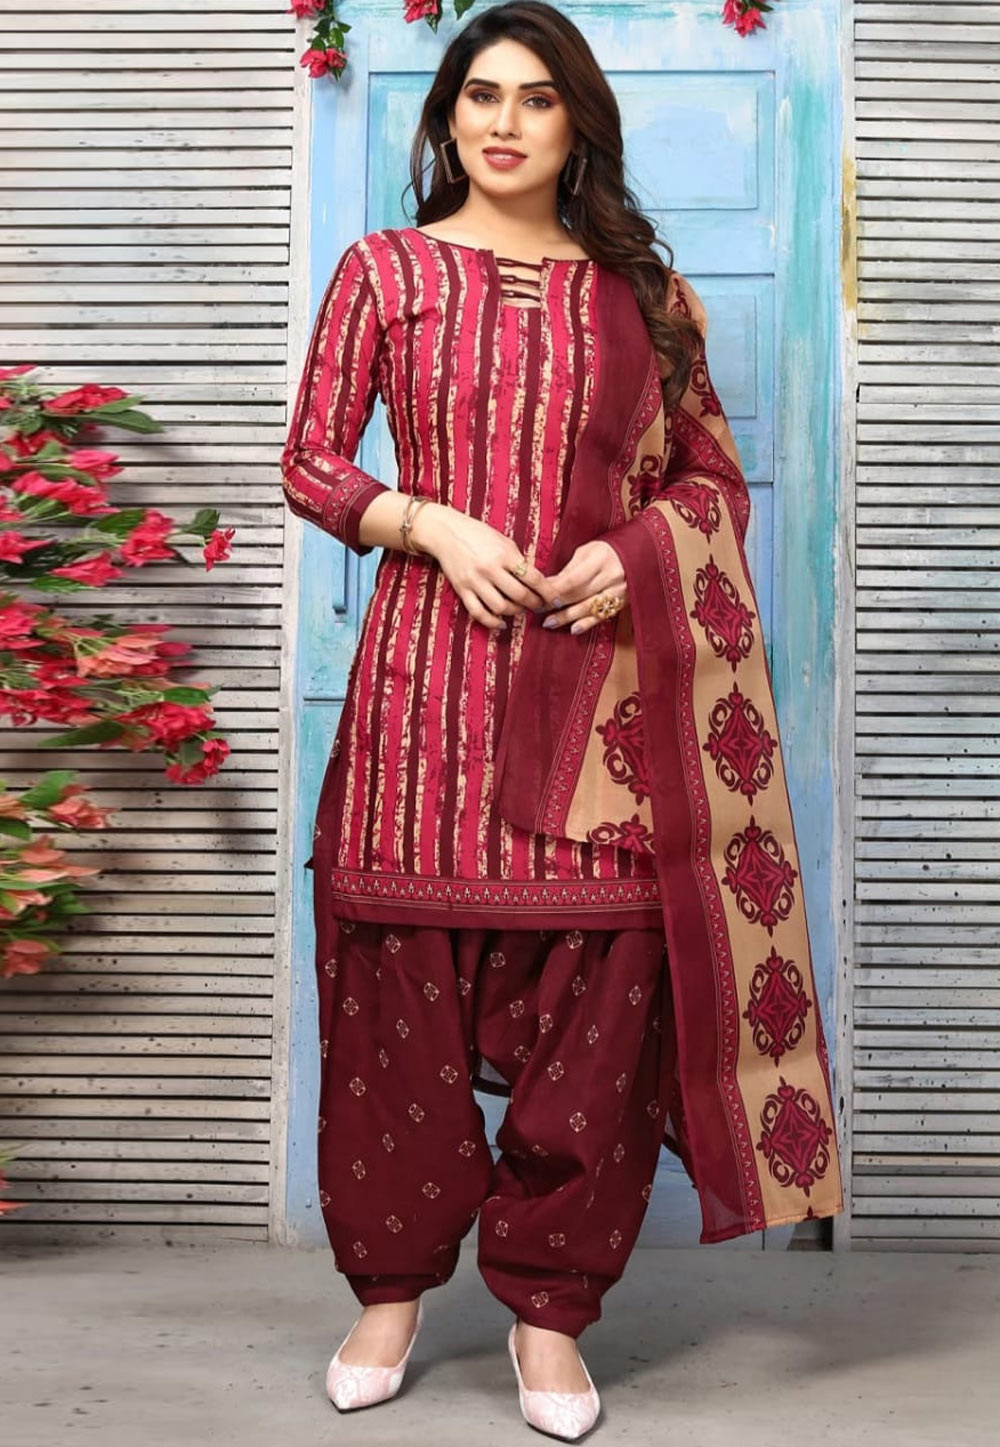 Latest neck designs of ladies suits 2016  Punjabi Suit Neck Images Salwar  Kameez Back Gala Designs  Blouses Discover the Latest Best Selling Shop  womens shirts highquality blouses